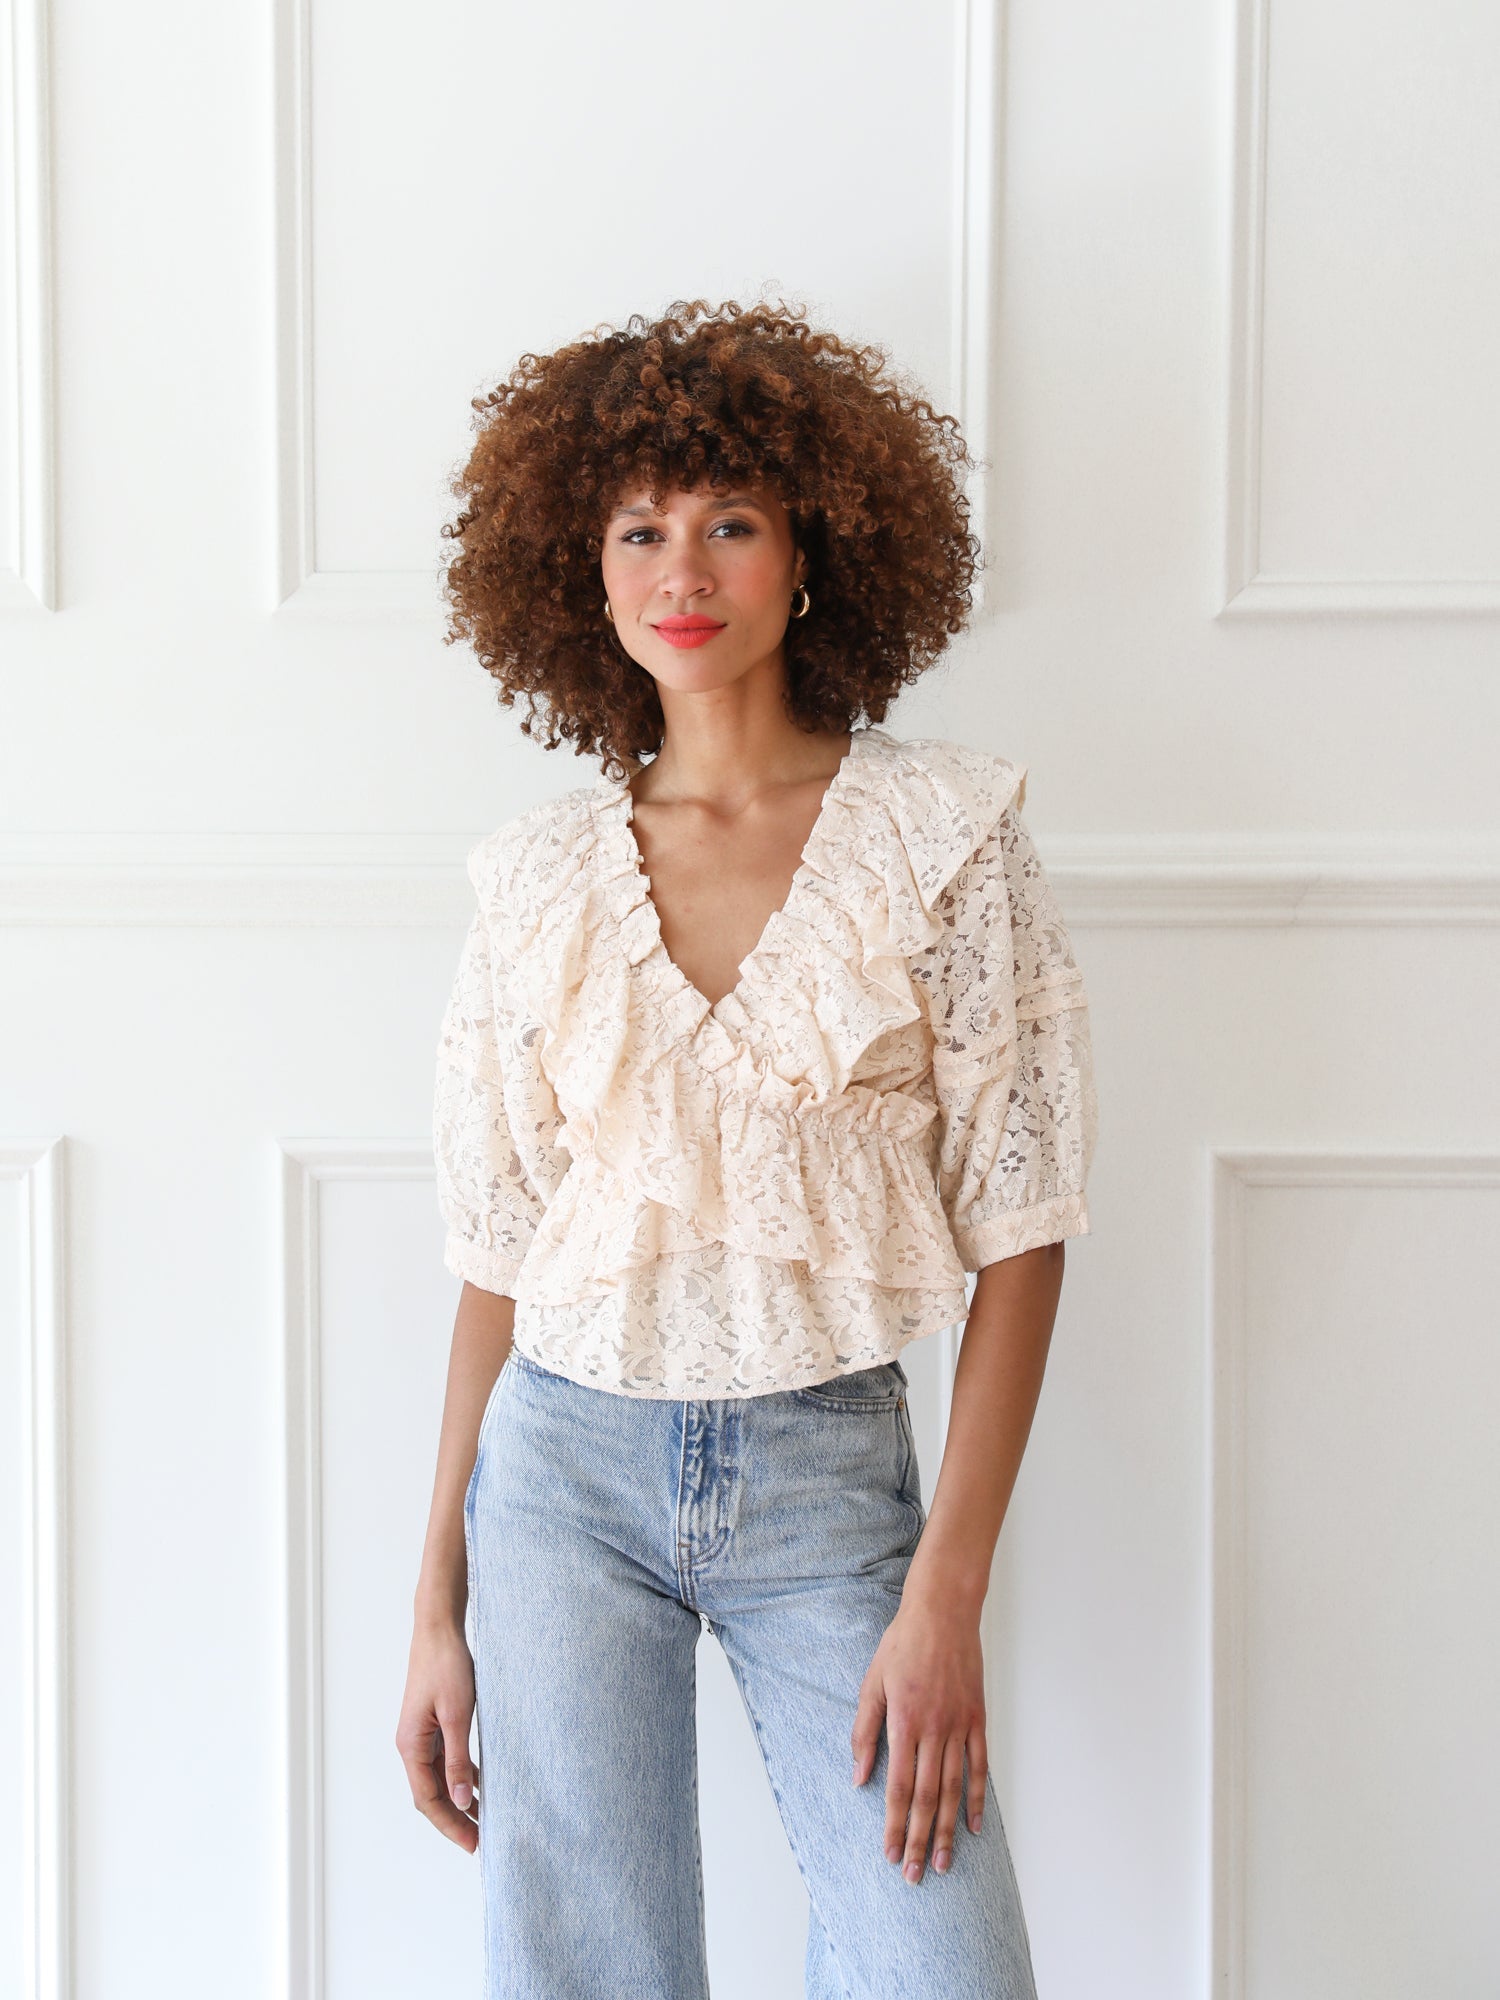 MILLE Clothing Isabella Top in Vanilla Lace